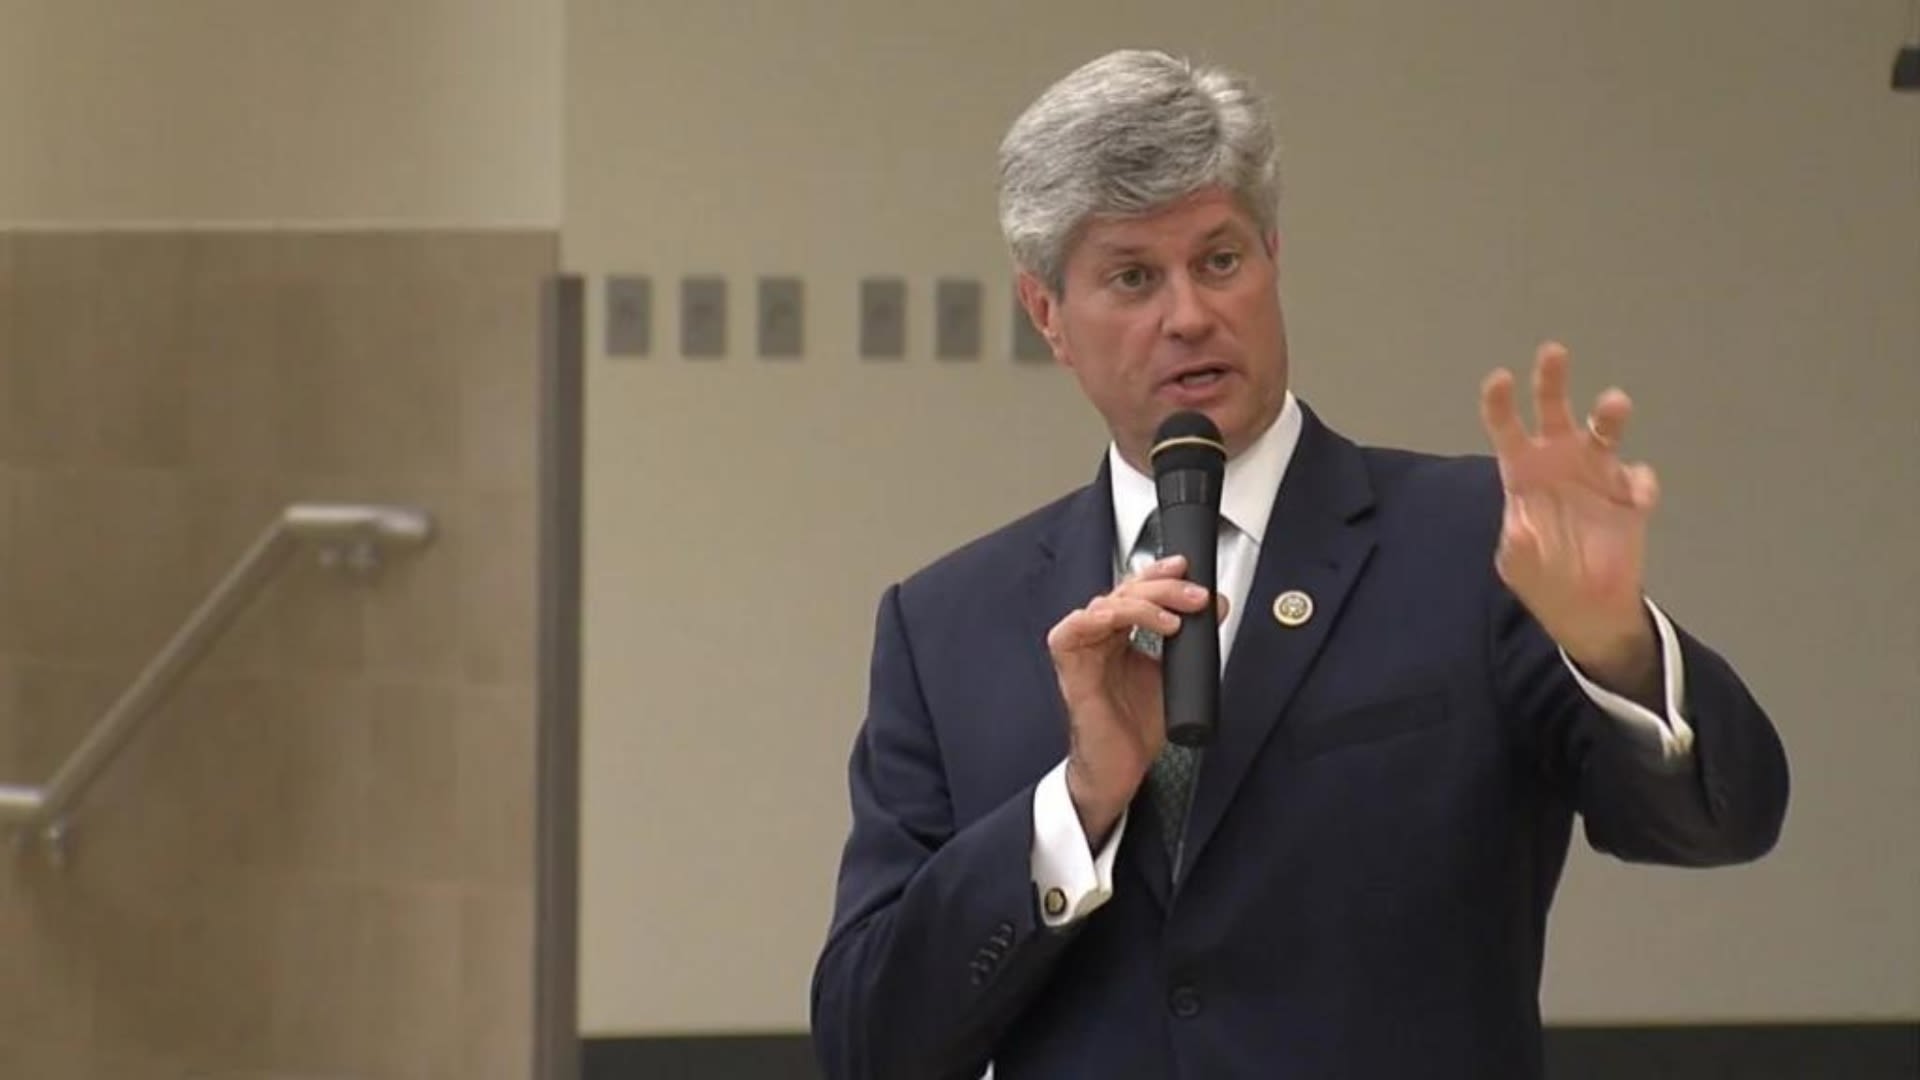 New trial set for February, again alleging Fortenberry lied to FBI after 2016 fundraiser